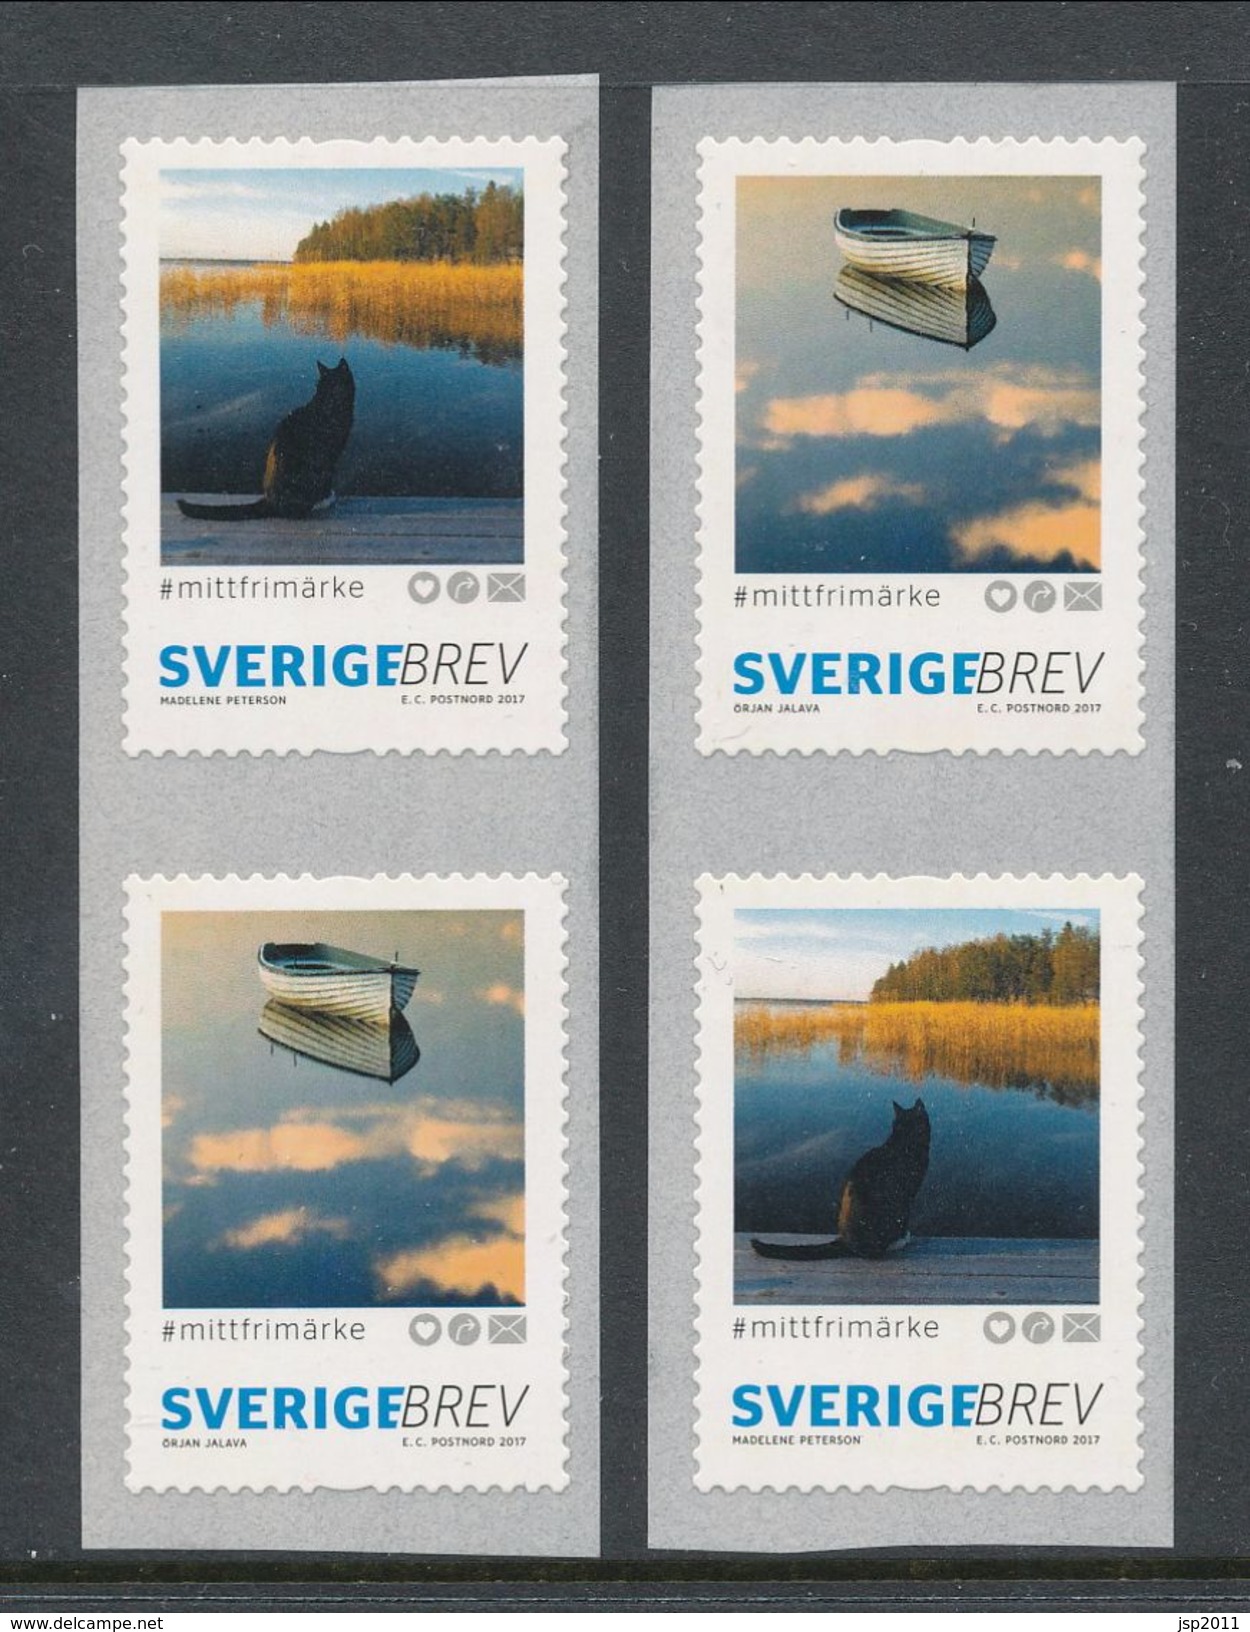 Sweden 2017. Facit # 3176-3177. My Stamp - National Mail Coil. Coil Pairs SX1 And SX2. MNH (**) - Neufs